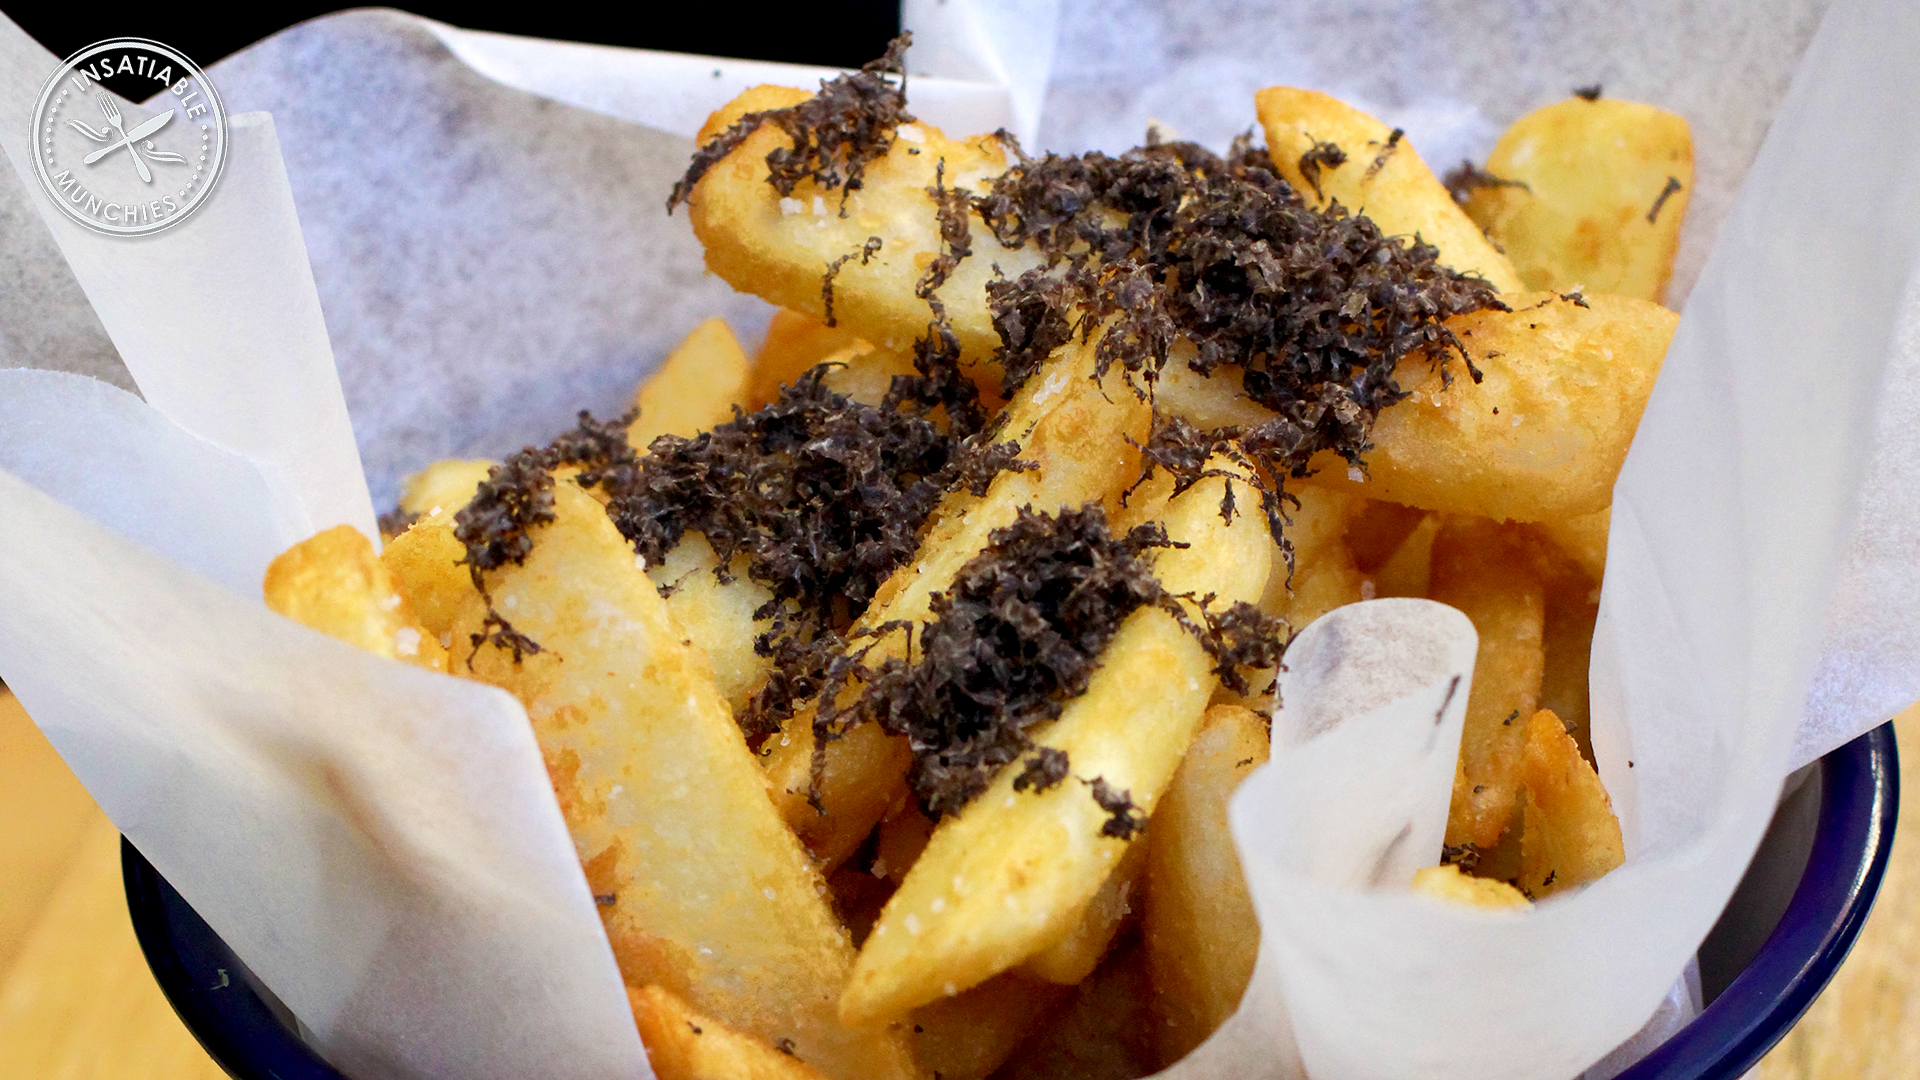 Golden fries, topped with freshly shaved truffles